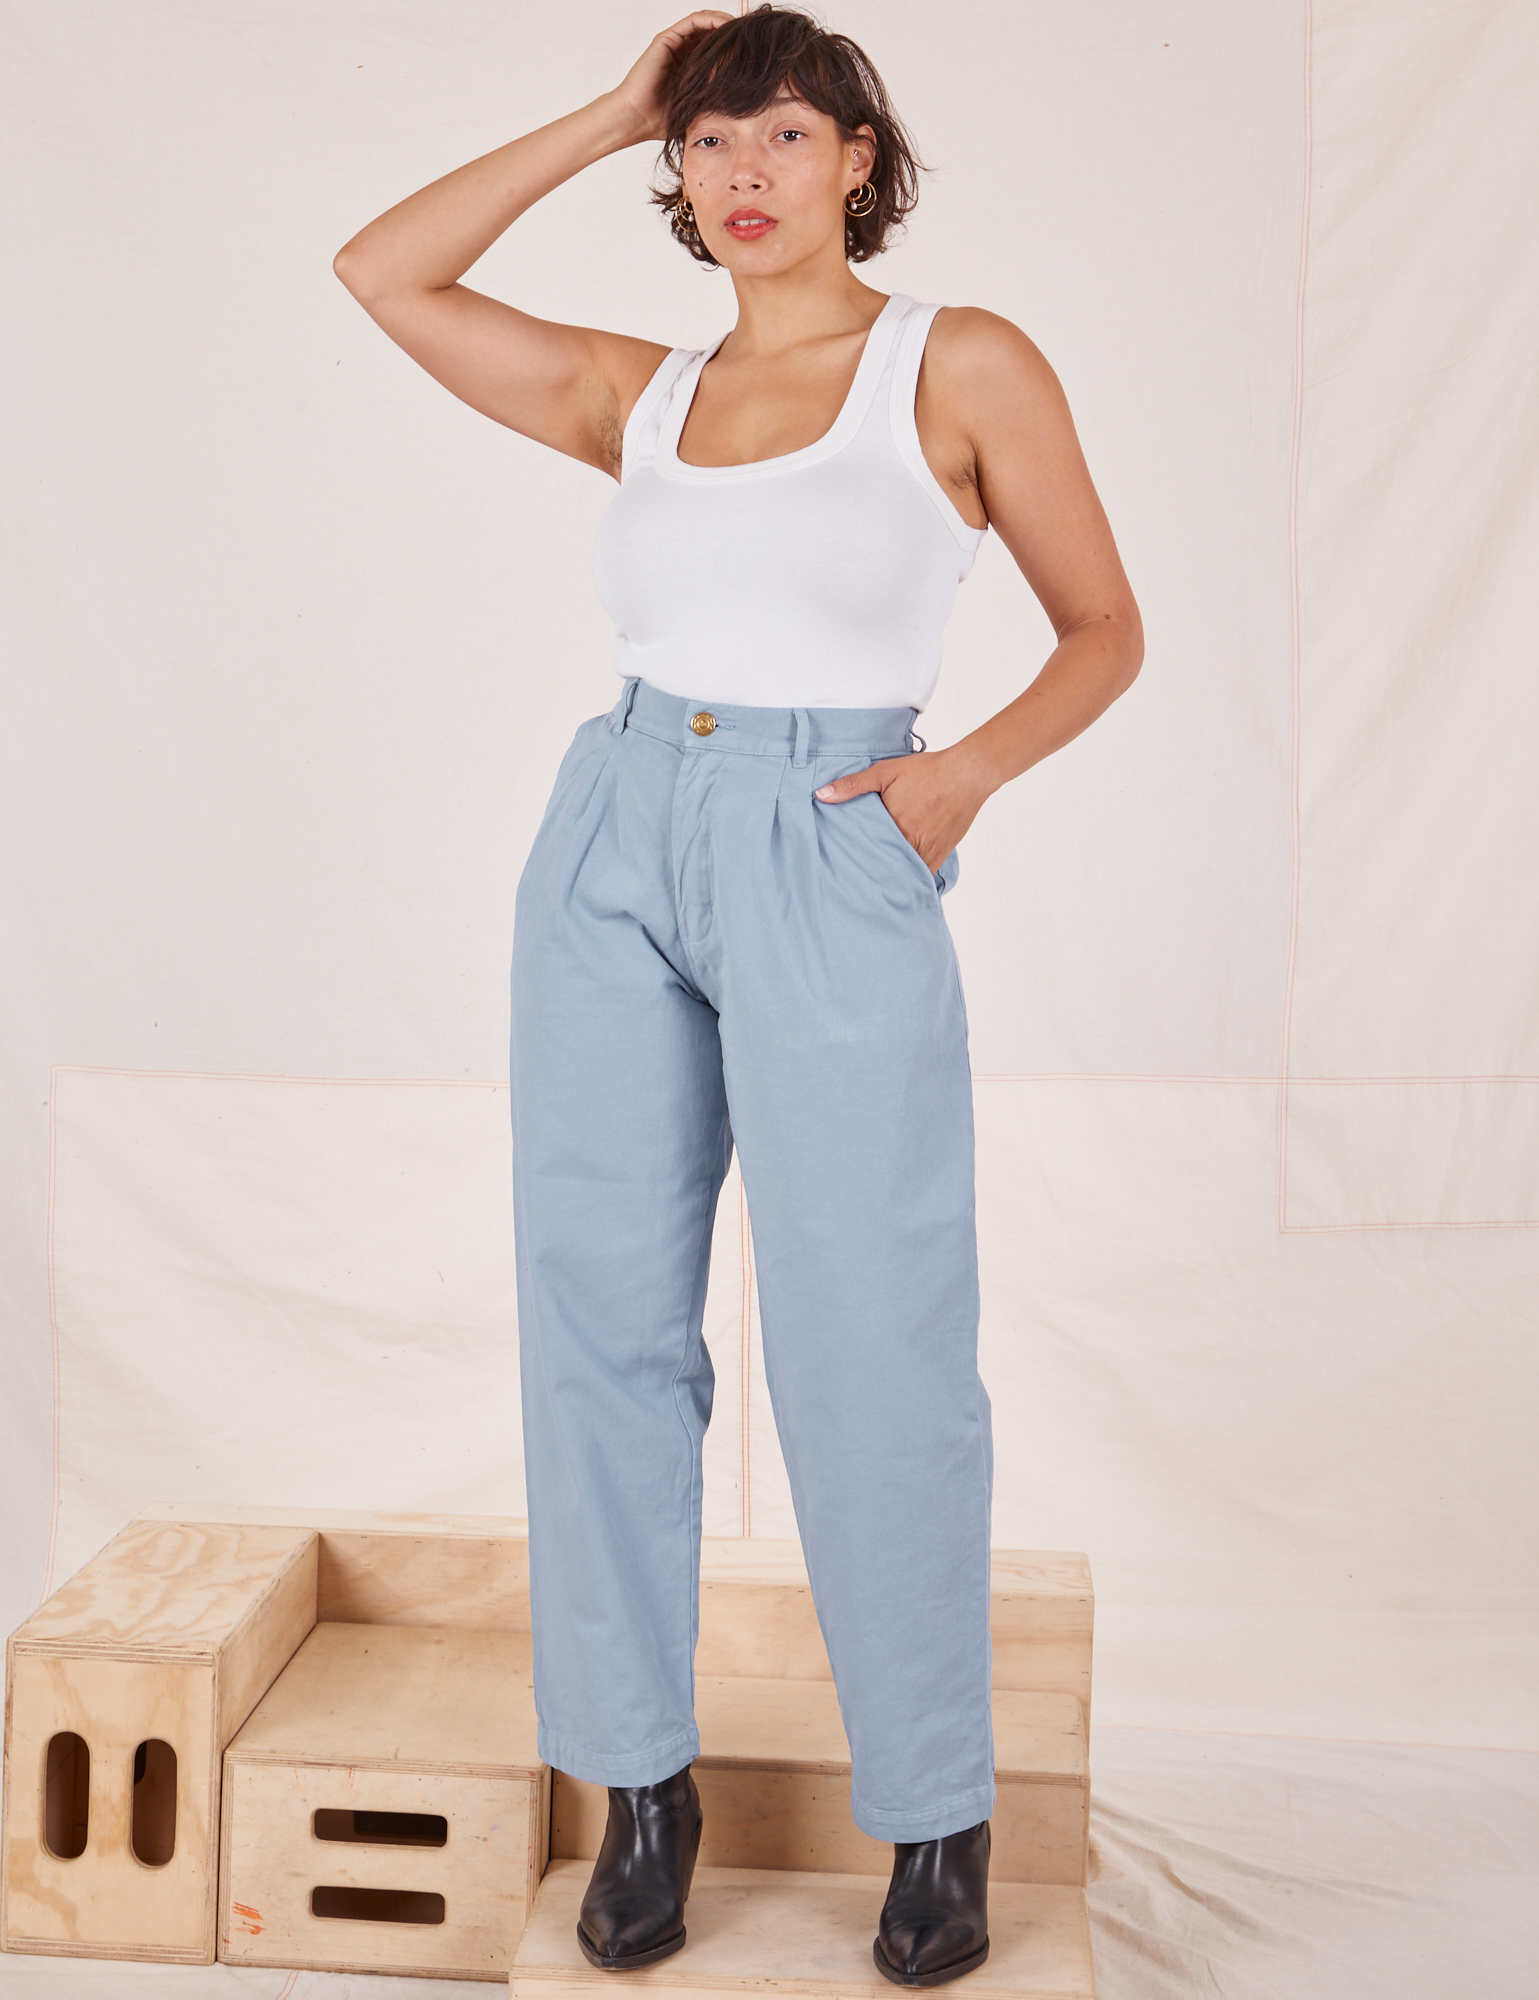 Tiara is 5'4" and wearing XS Heavyweight Trousers in Periwinkle paired with Cropped Tank Top in vintage tee off-white